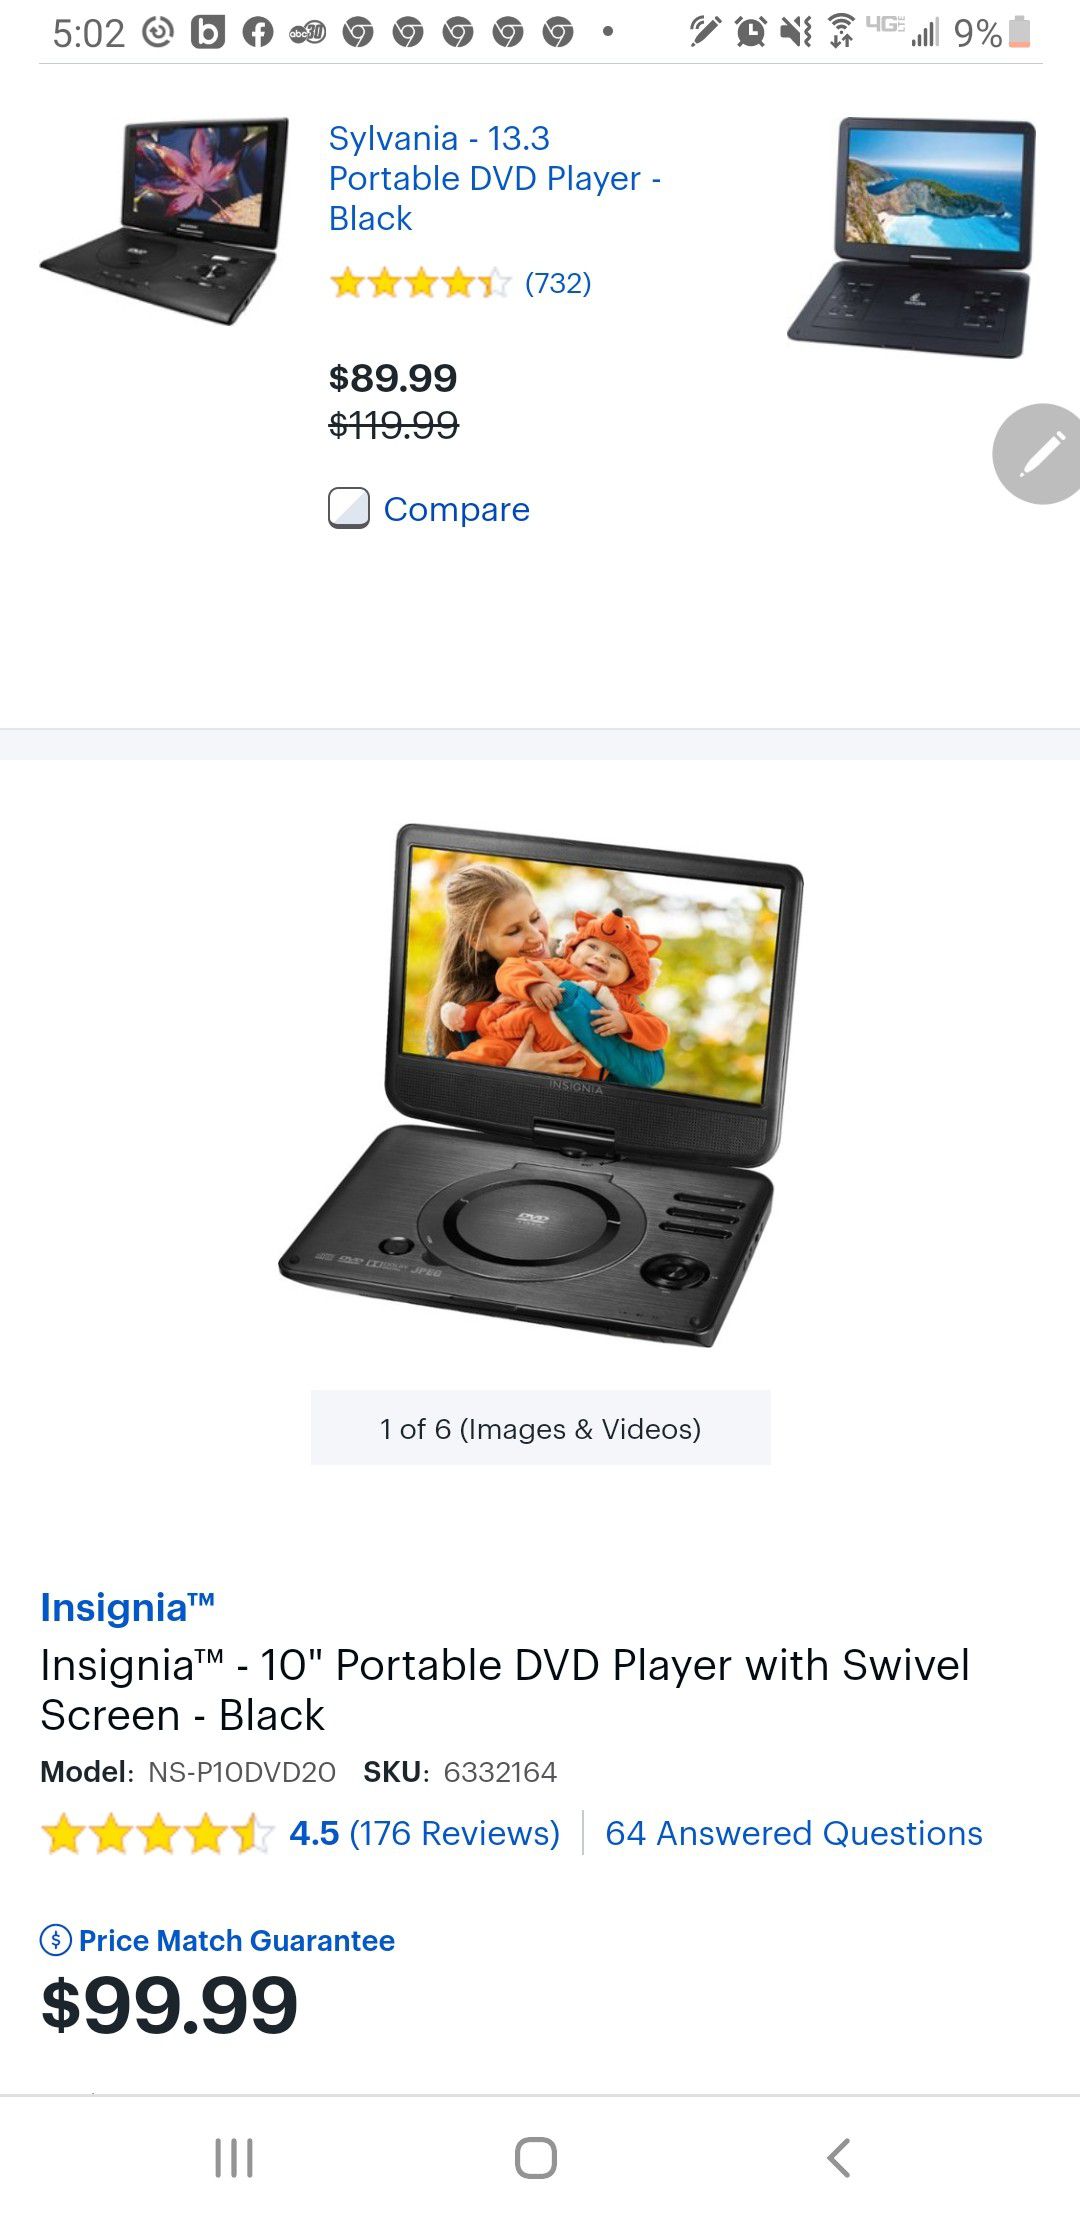 Insignia 10"portable DVD player with swivel screen